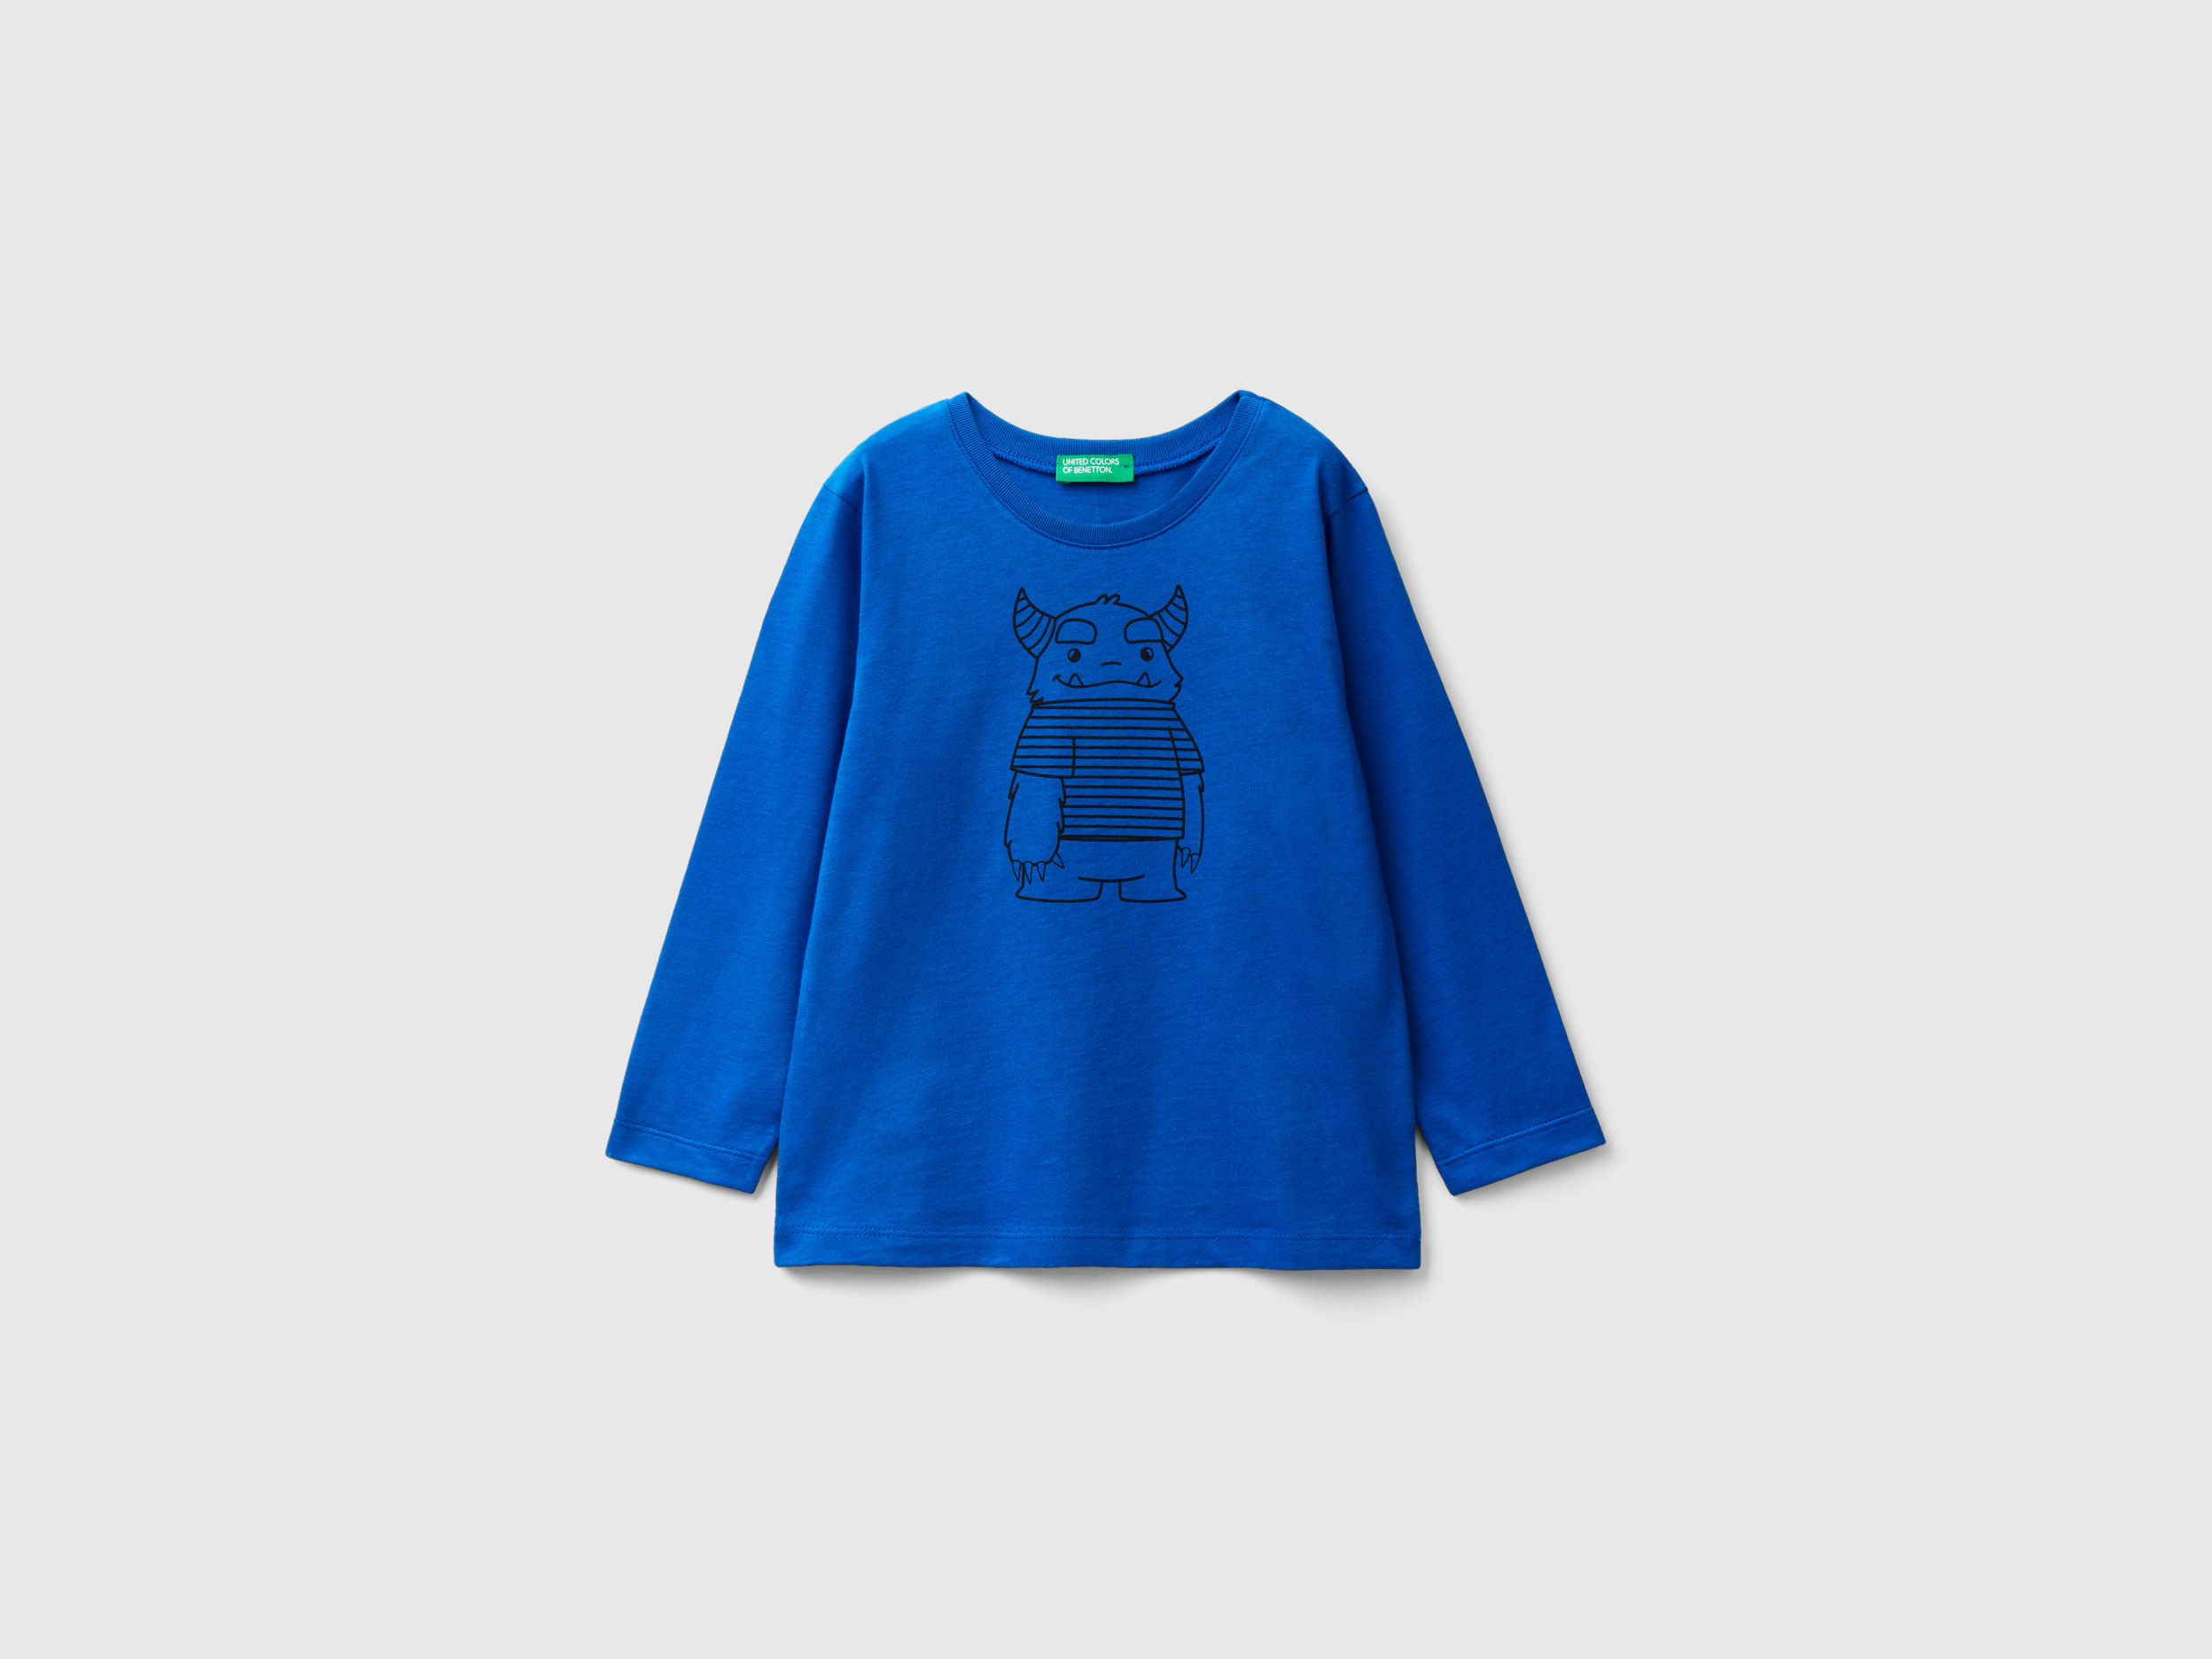 Benetton, Sweater In Cotton With Print, size 4-5, Bright Blue, Kids